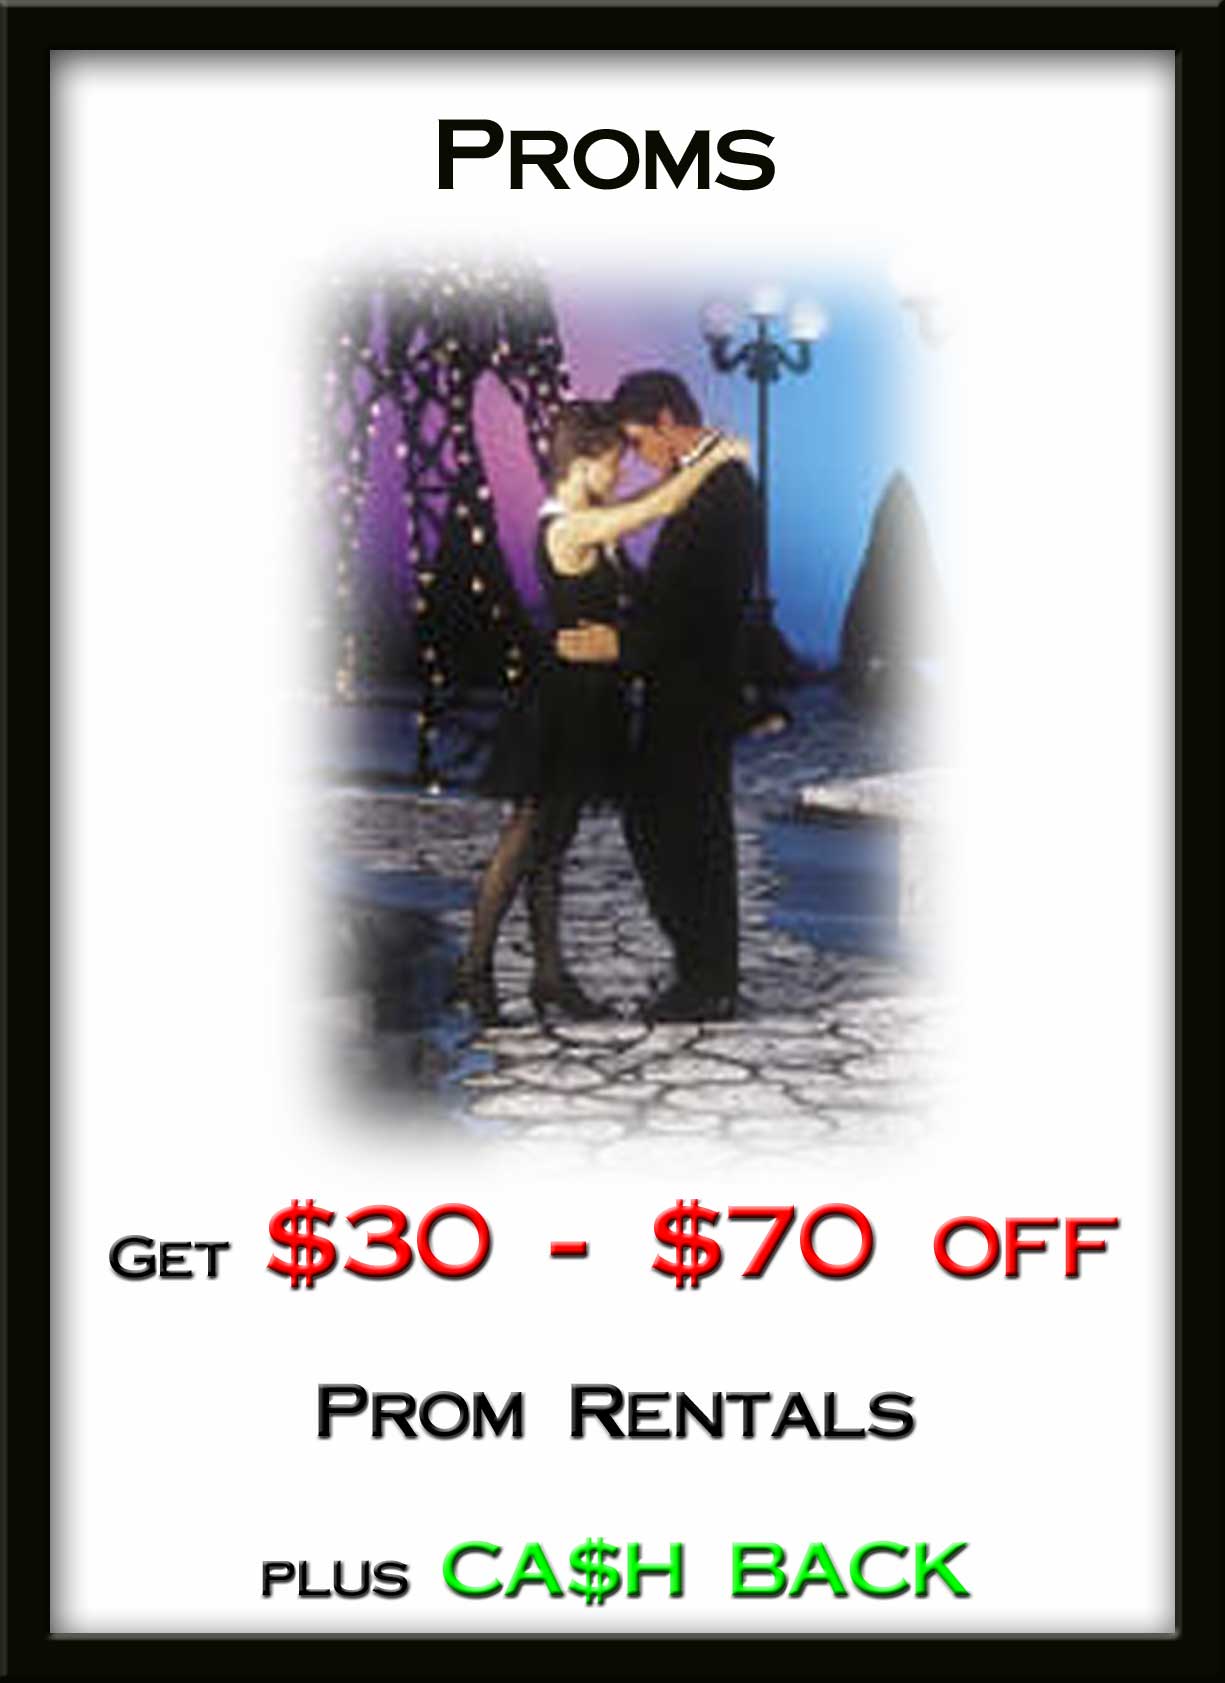 Prom Specials - Tuxedos and Formal Wear - Lowell, MA